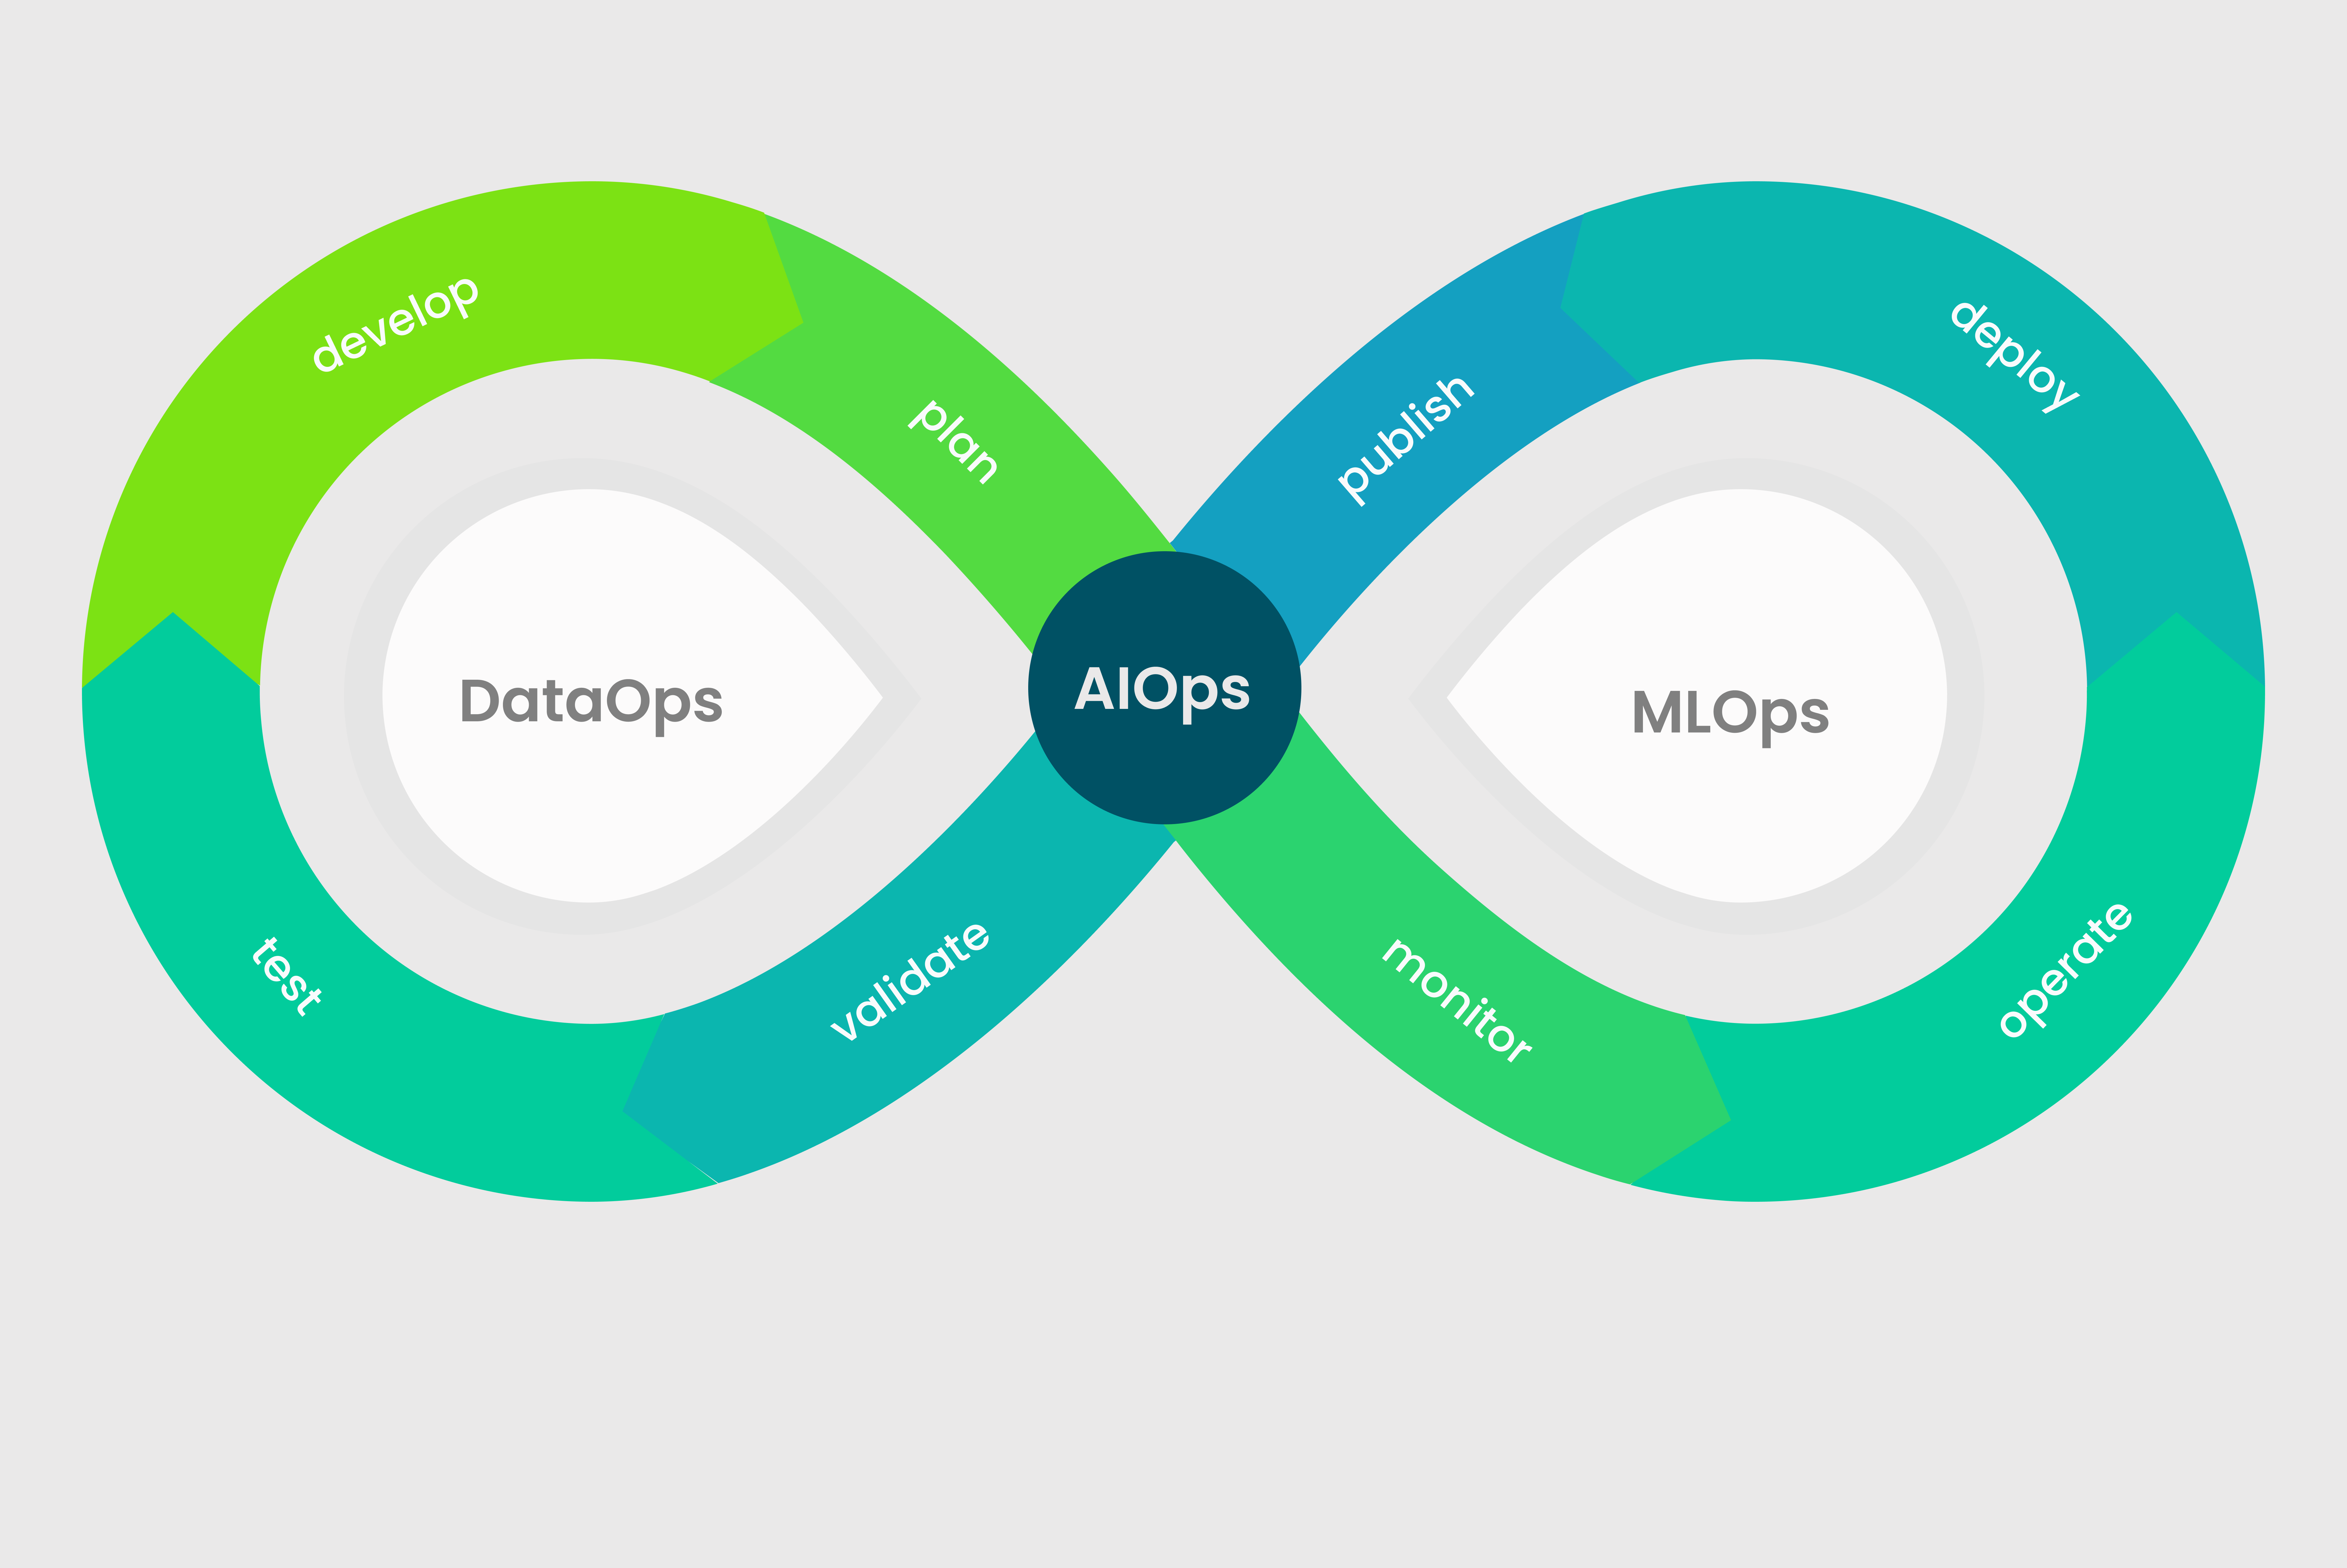 How DataOps, AIOps, And MLOps Powers Digital Transformation?